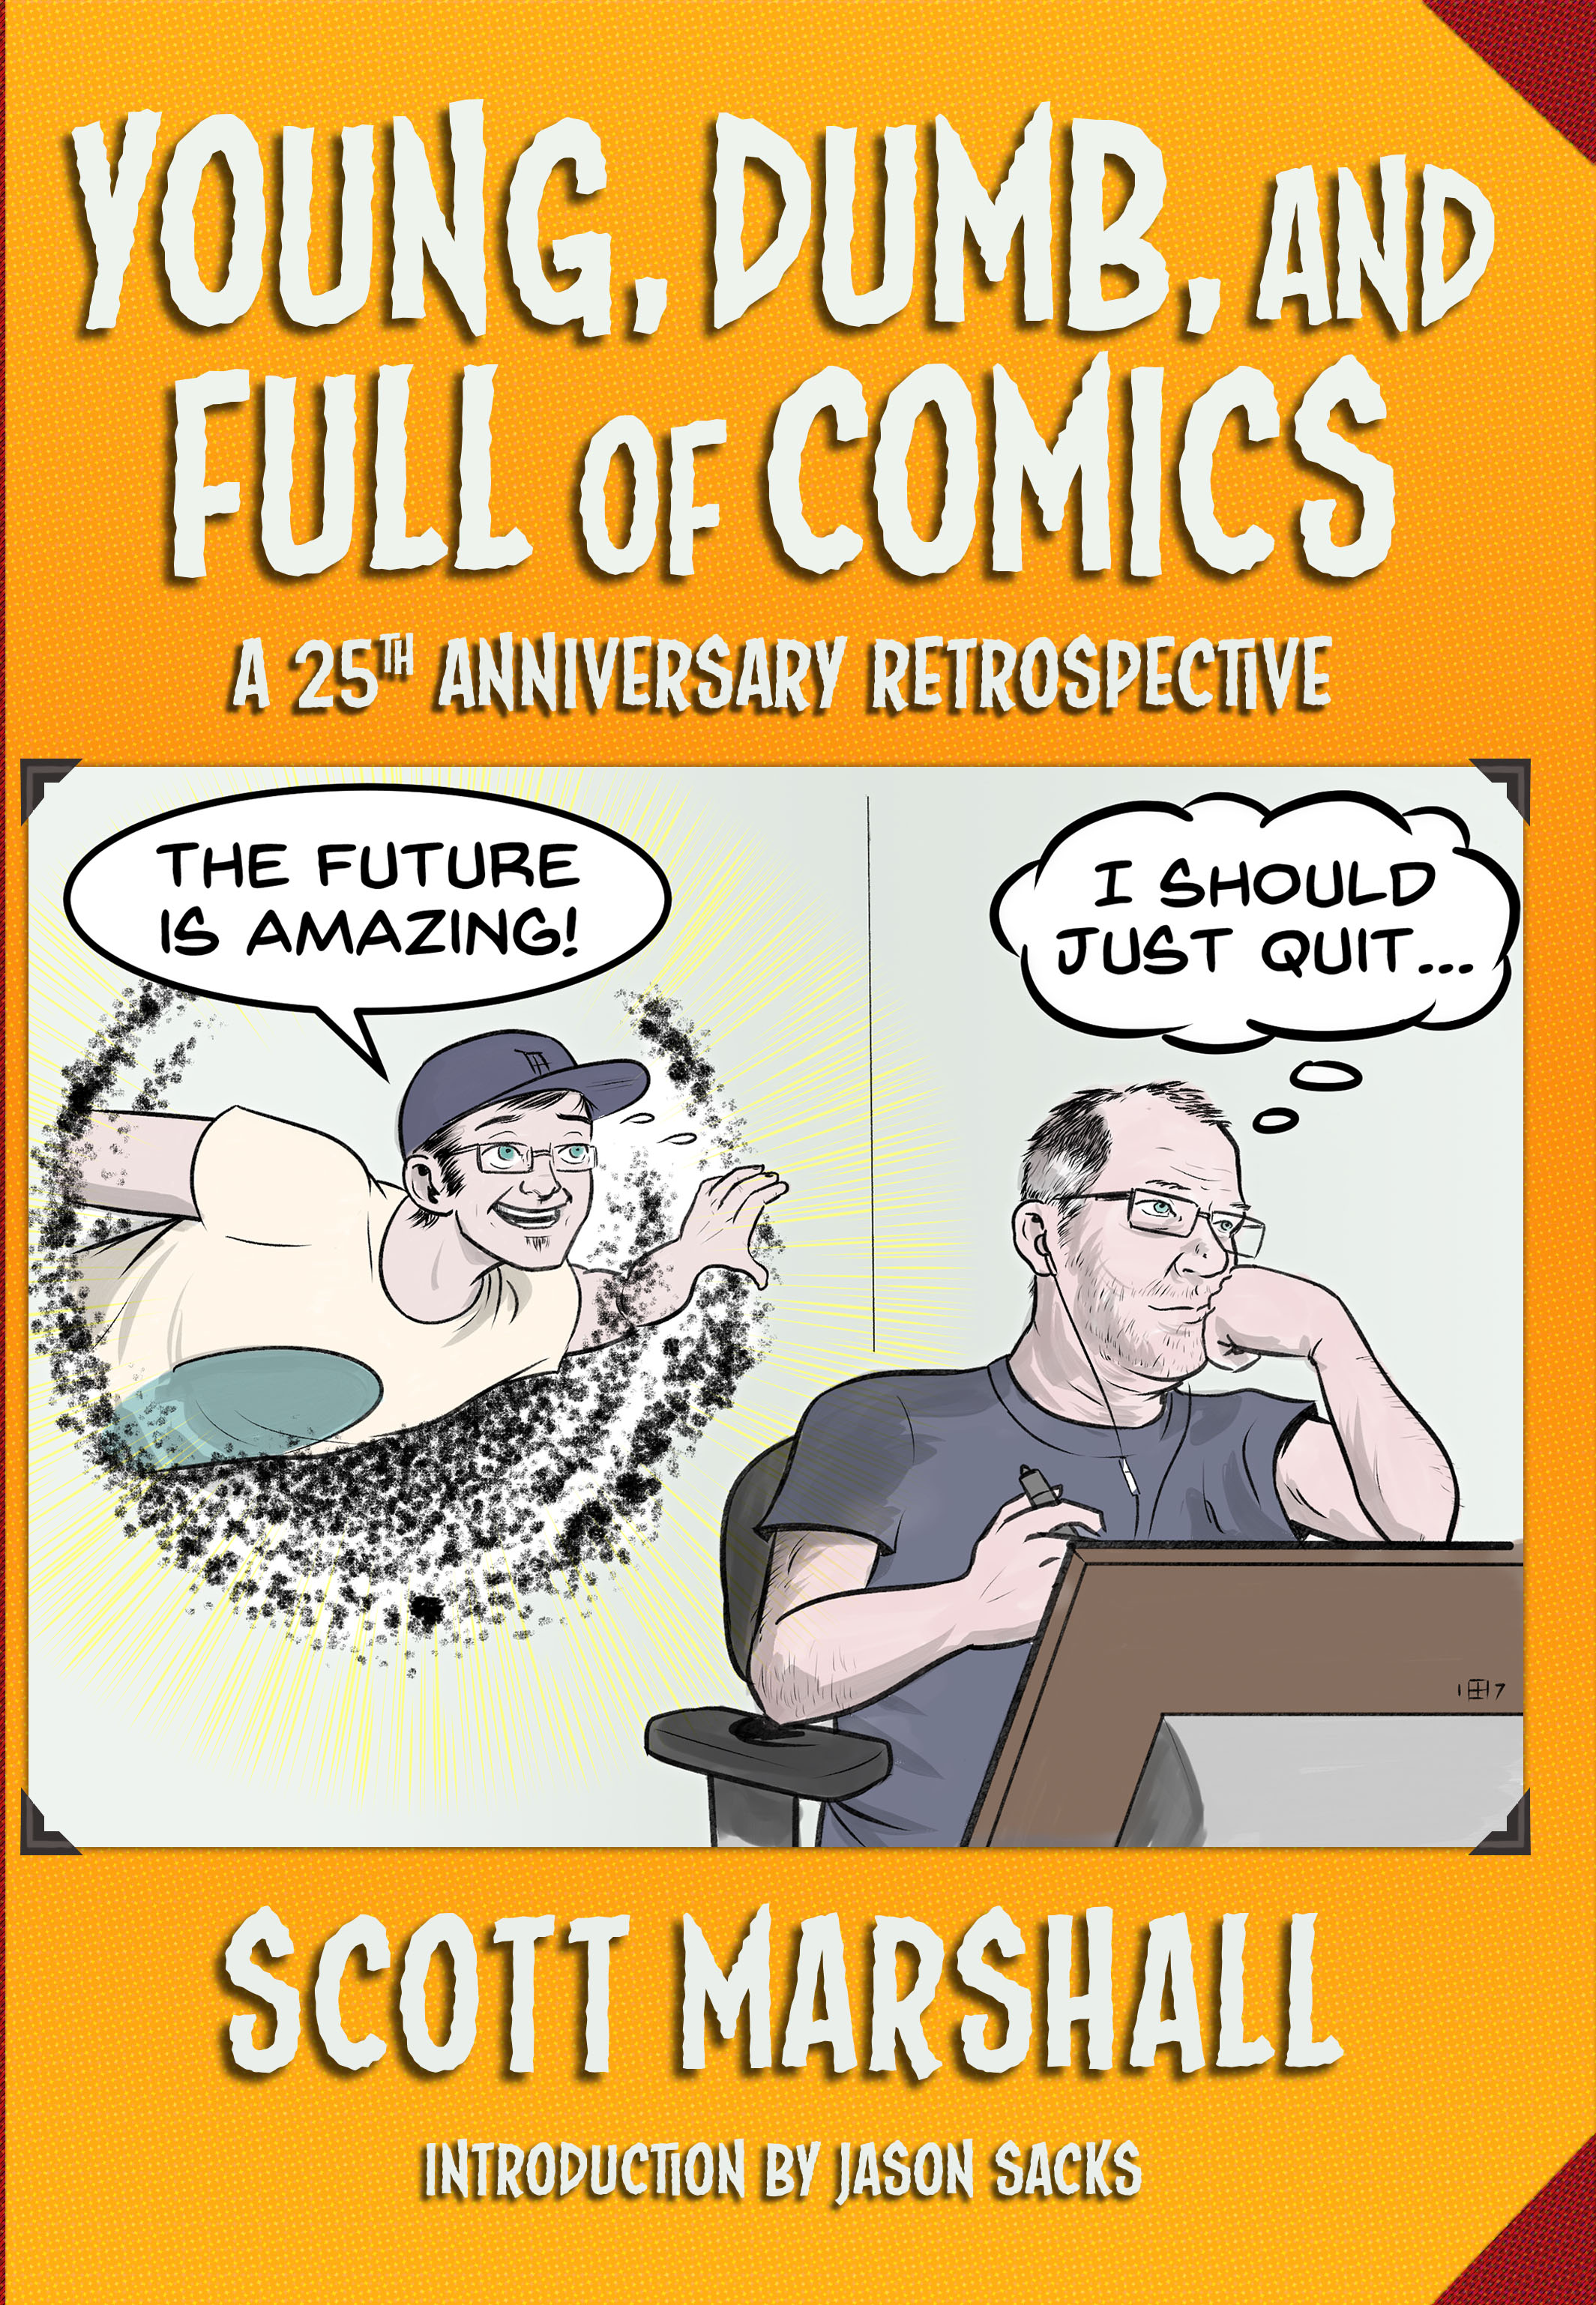 Cover art for Young, Dumb, and Full of Comics by Scott Marshall